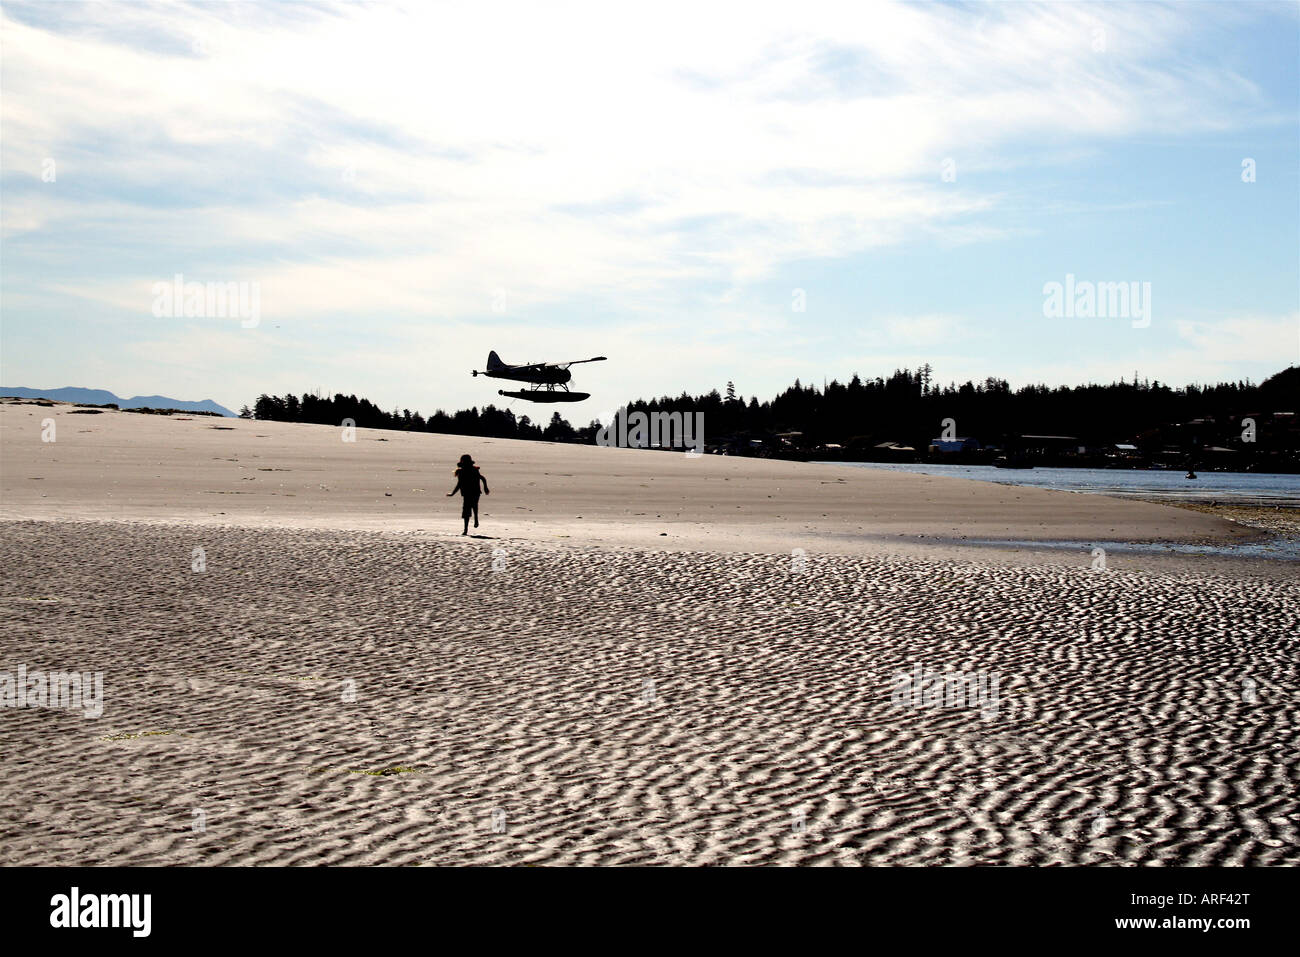 Tofino Sea-plane with silhouette of a child in the foreground running on a beach Stock Photo